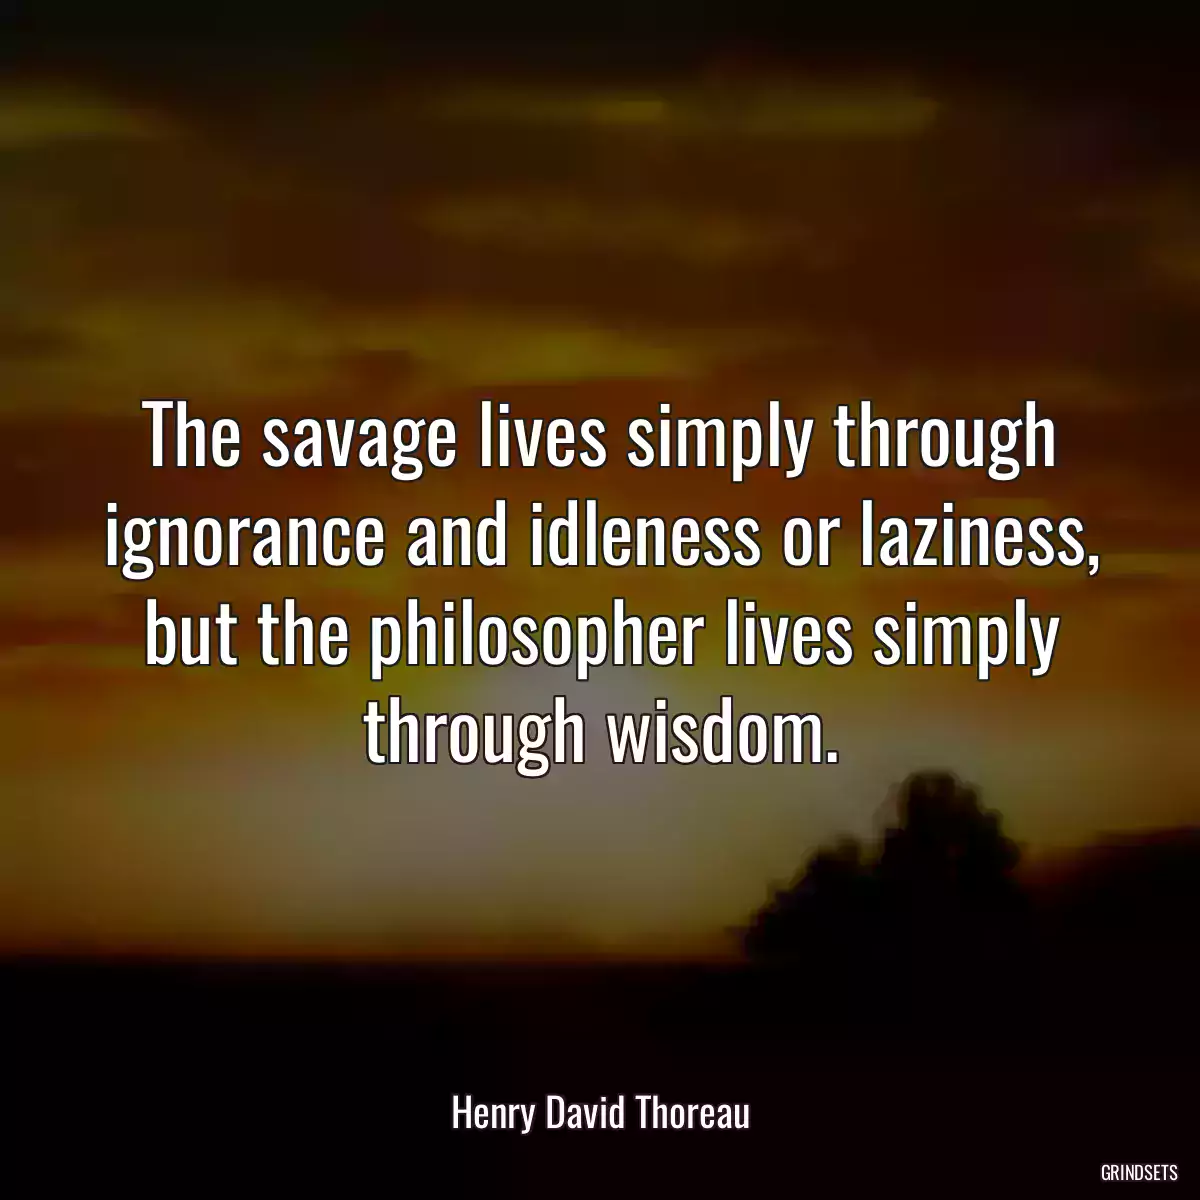 The savage lives simply through ignorance and idleness or laziness, but the philosopher lives simply through wisdom.